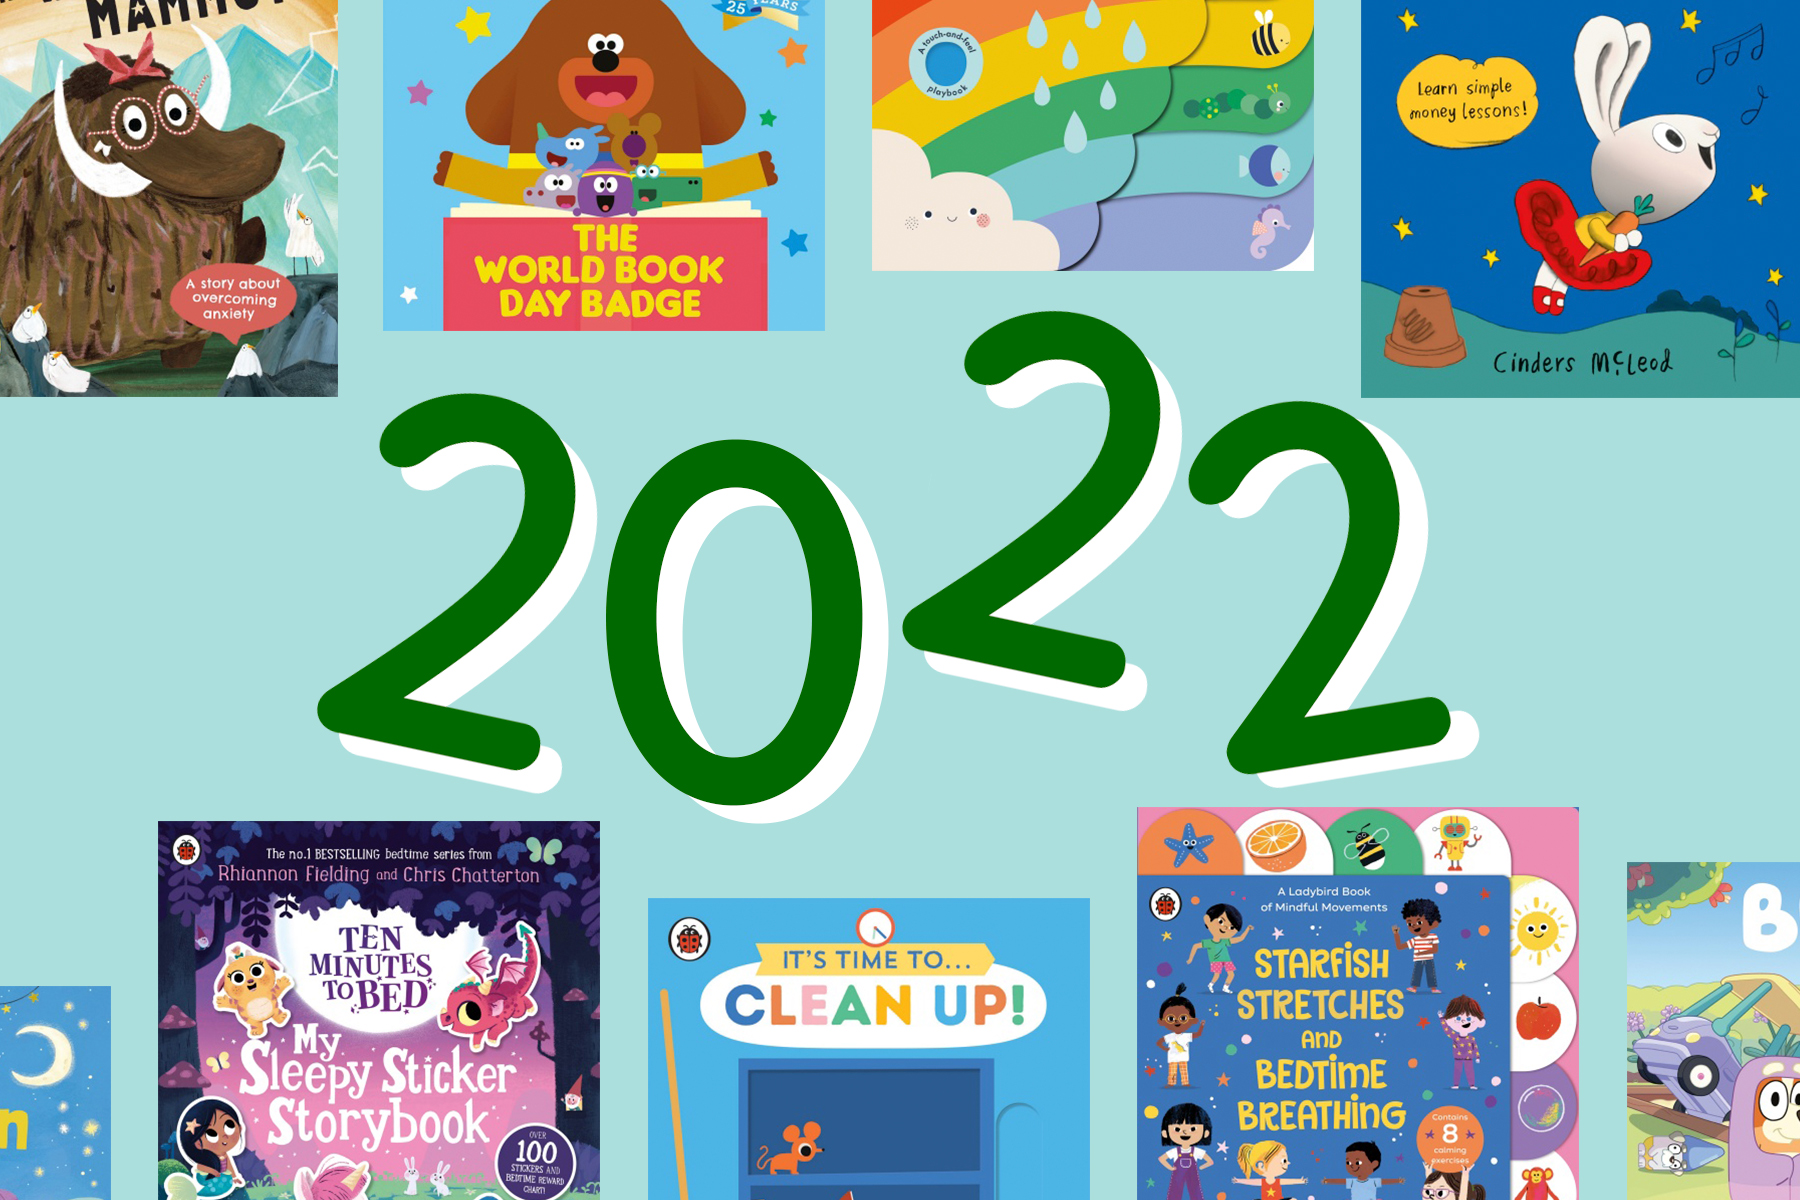 A picture of a selection of Ladybird books on a light green-blue background surrounding green '2022' lettering